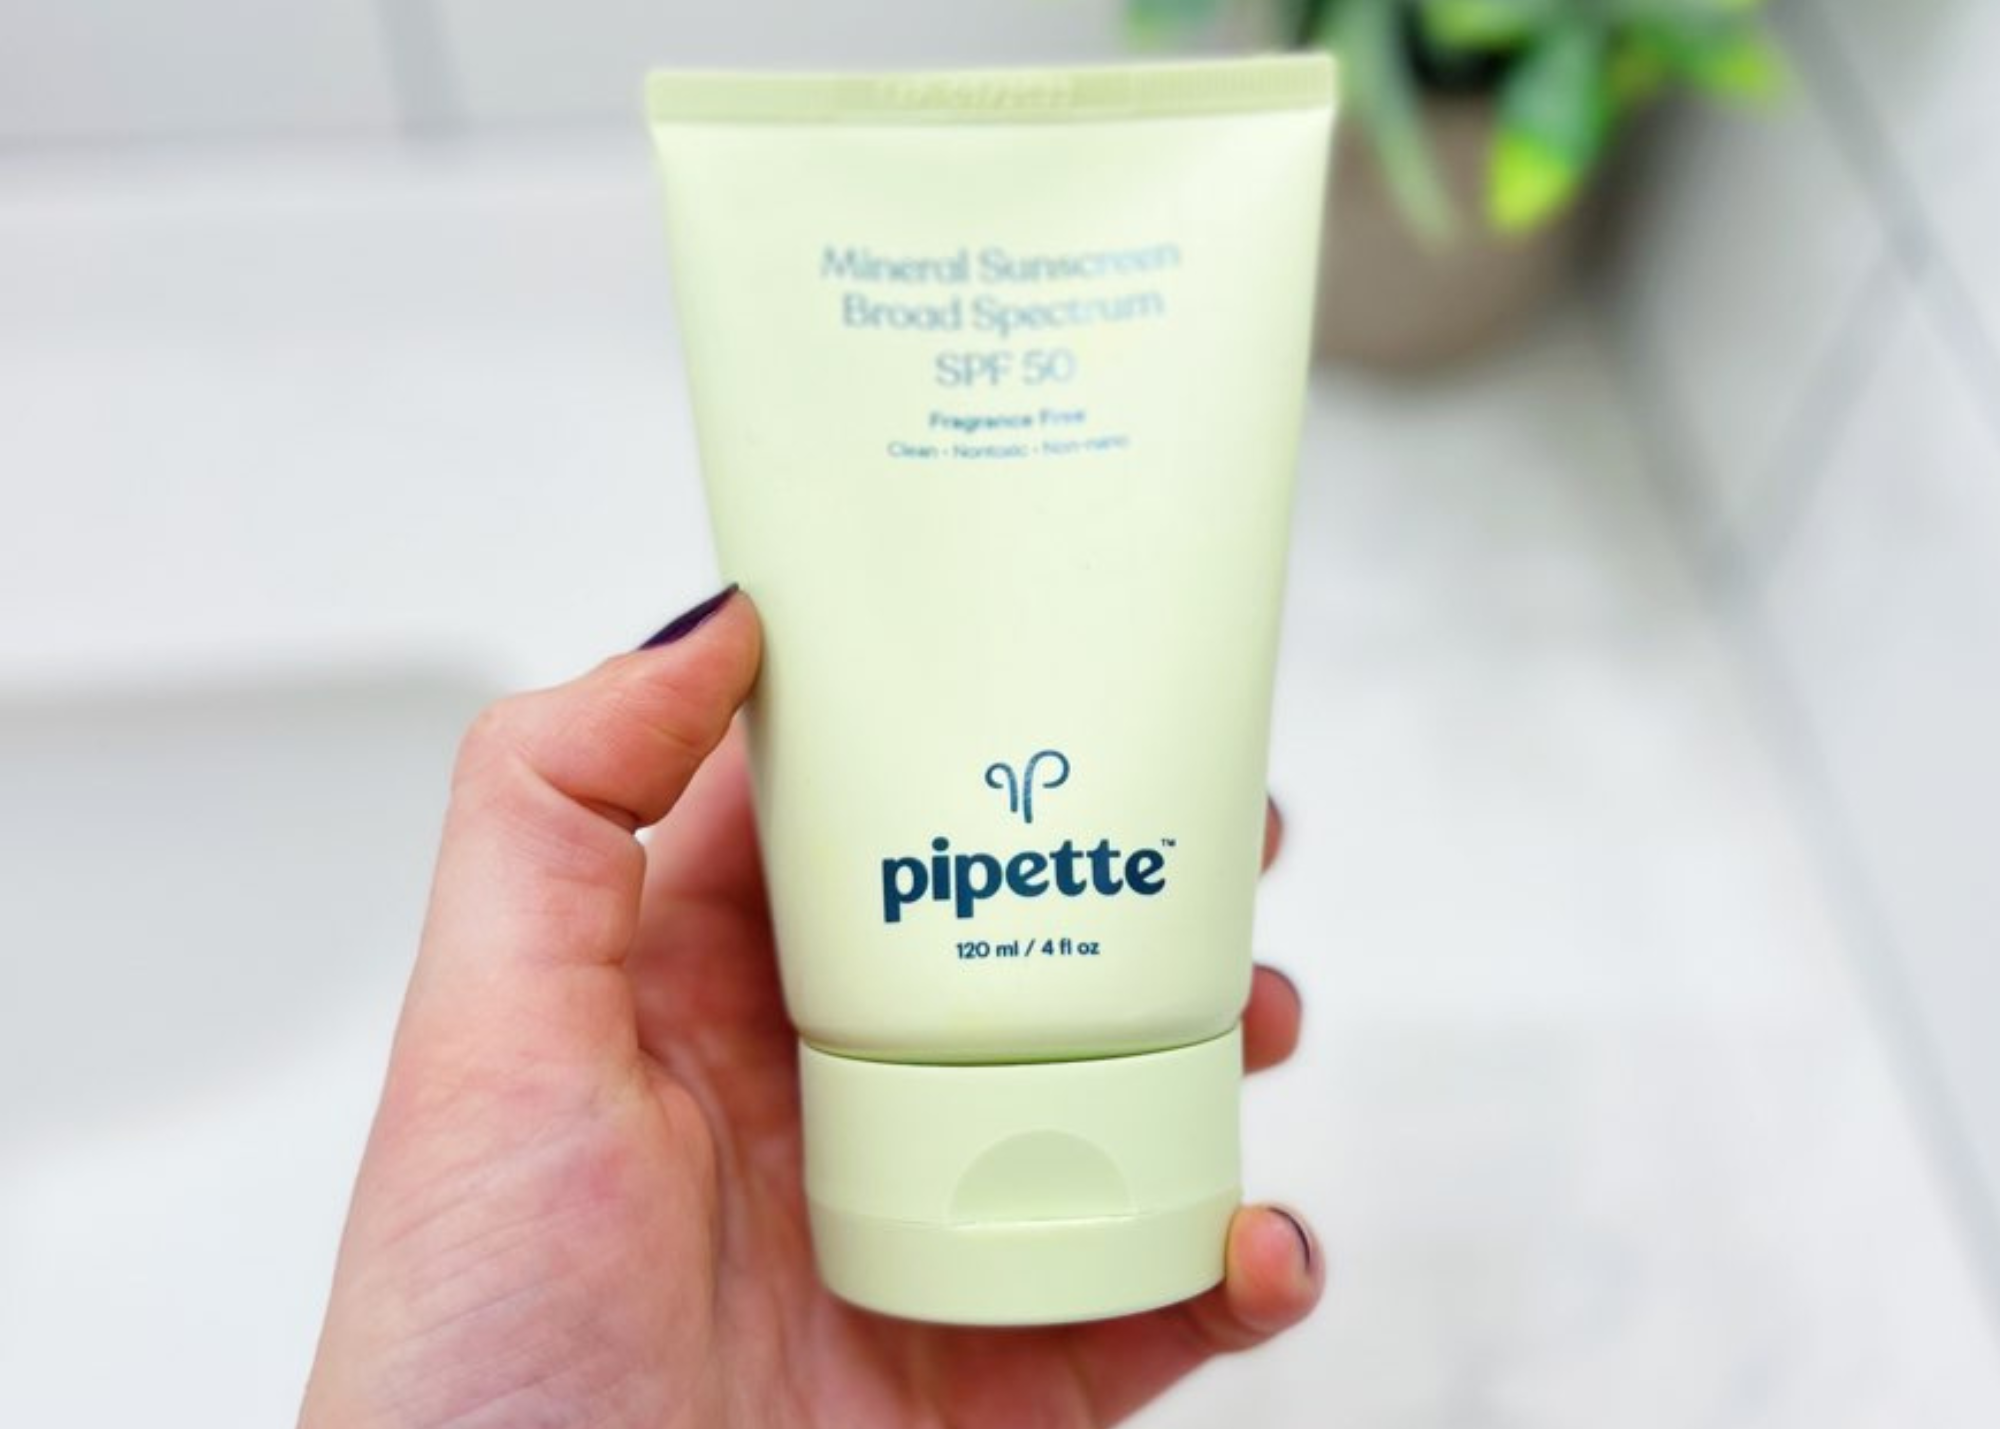 Pipette Sunscreen Review